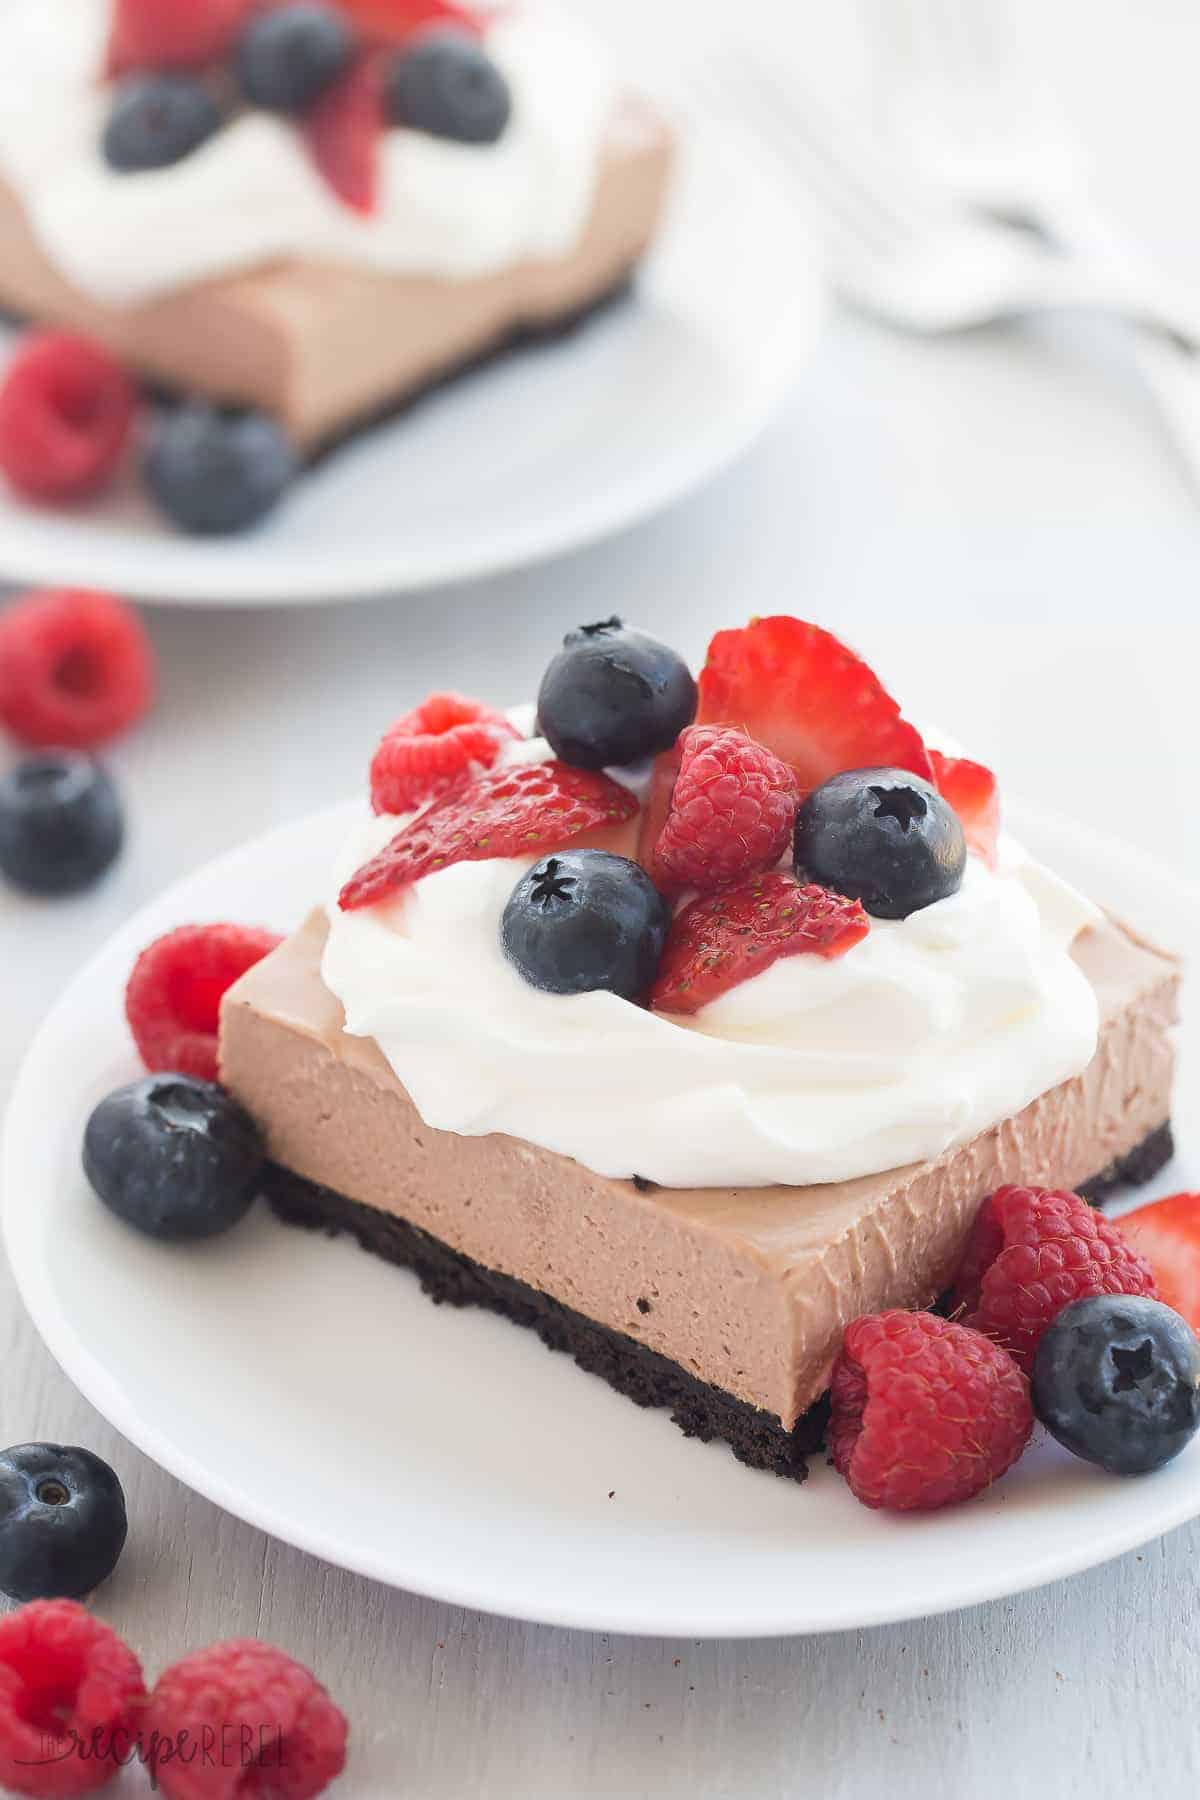 These No Bake Chocolate Nutella Cheesecake Bars are SO easy and perfect for topping with fresh berries! Rich, creamy and no oven required! thereciperebel.com